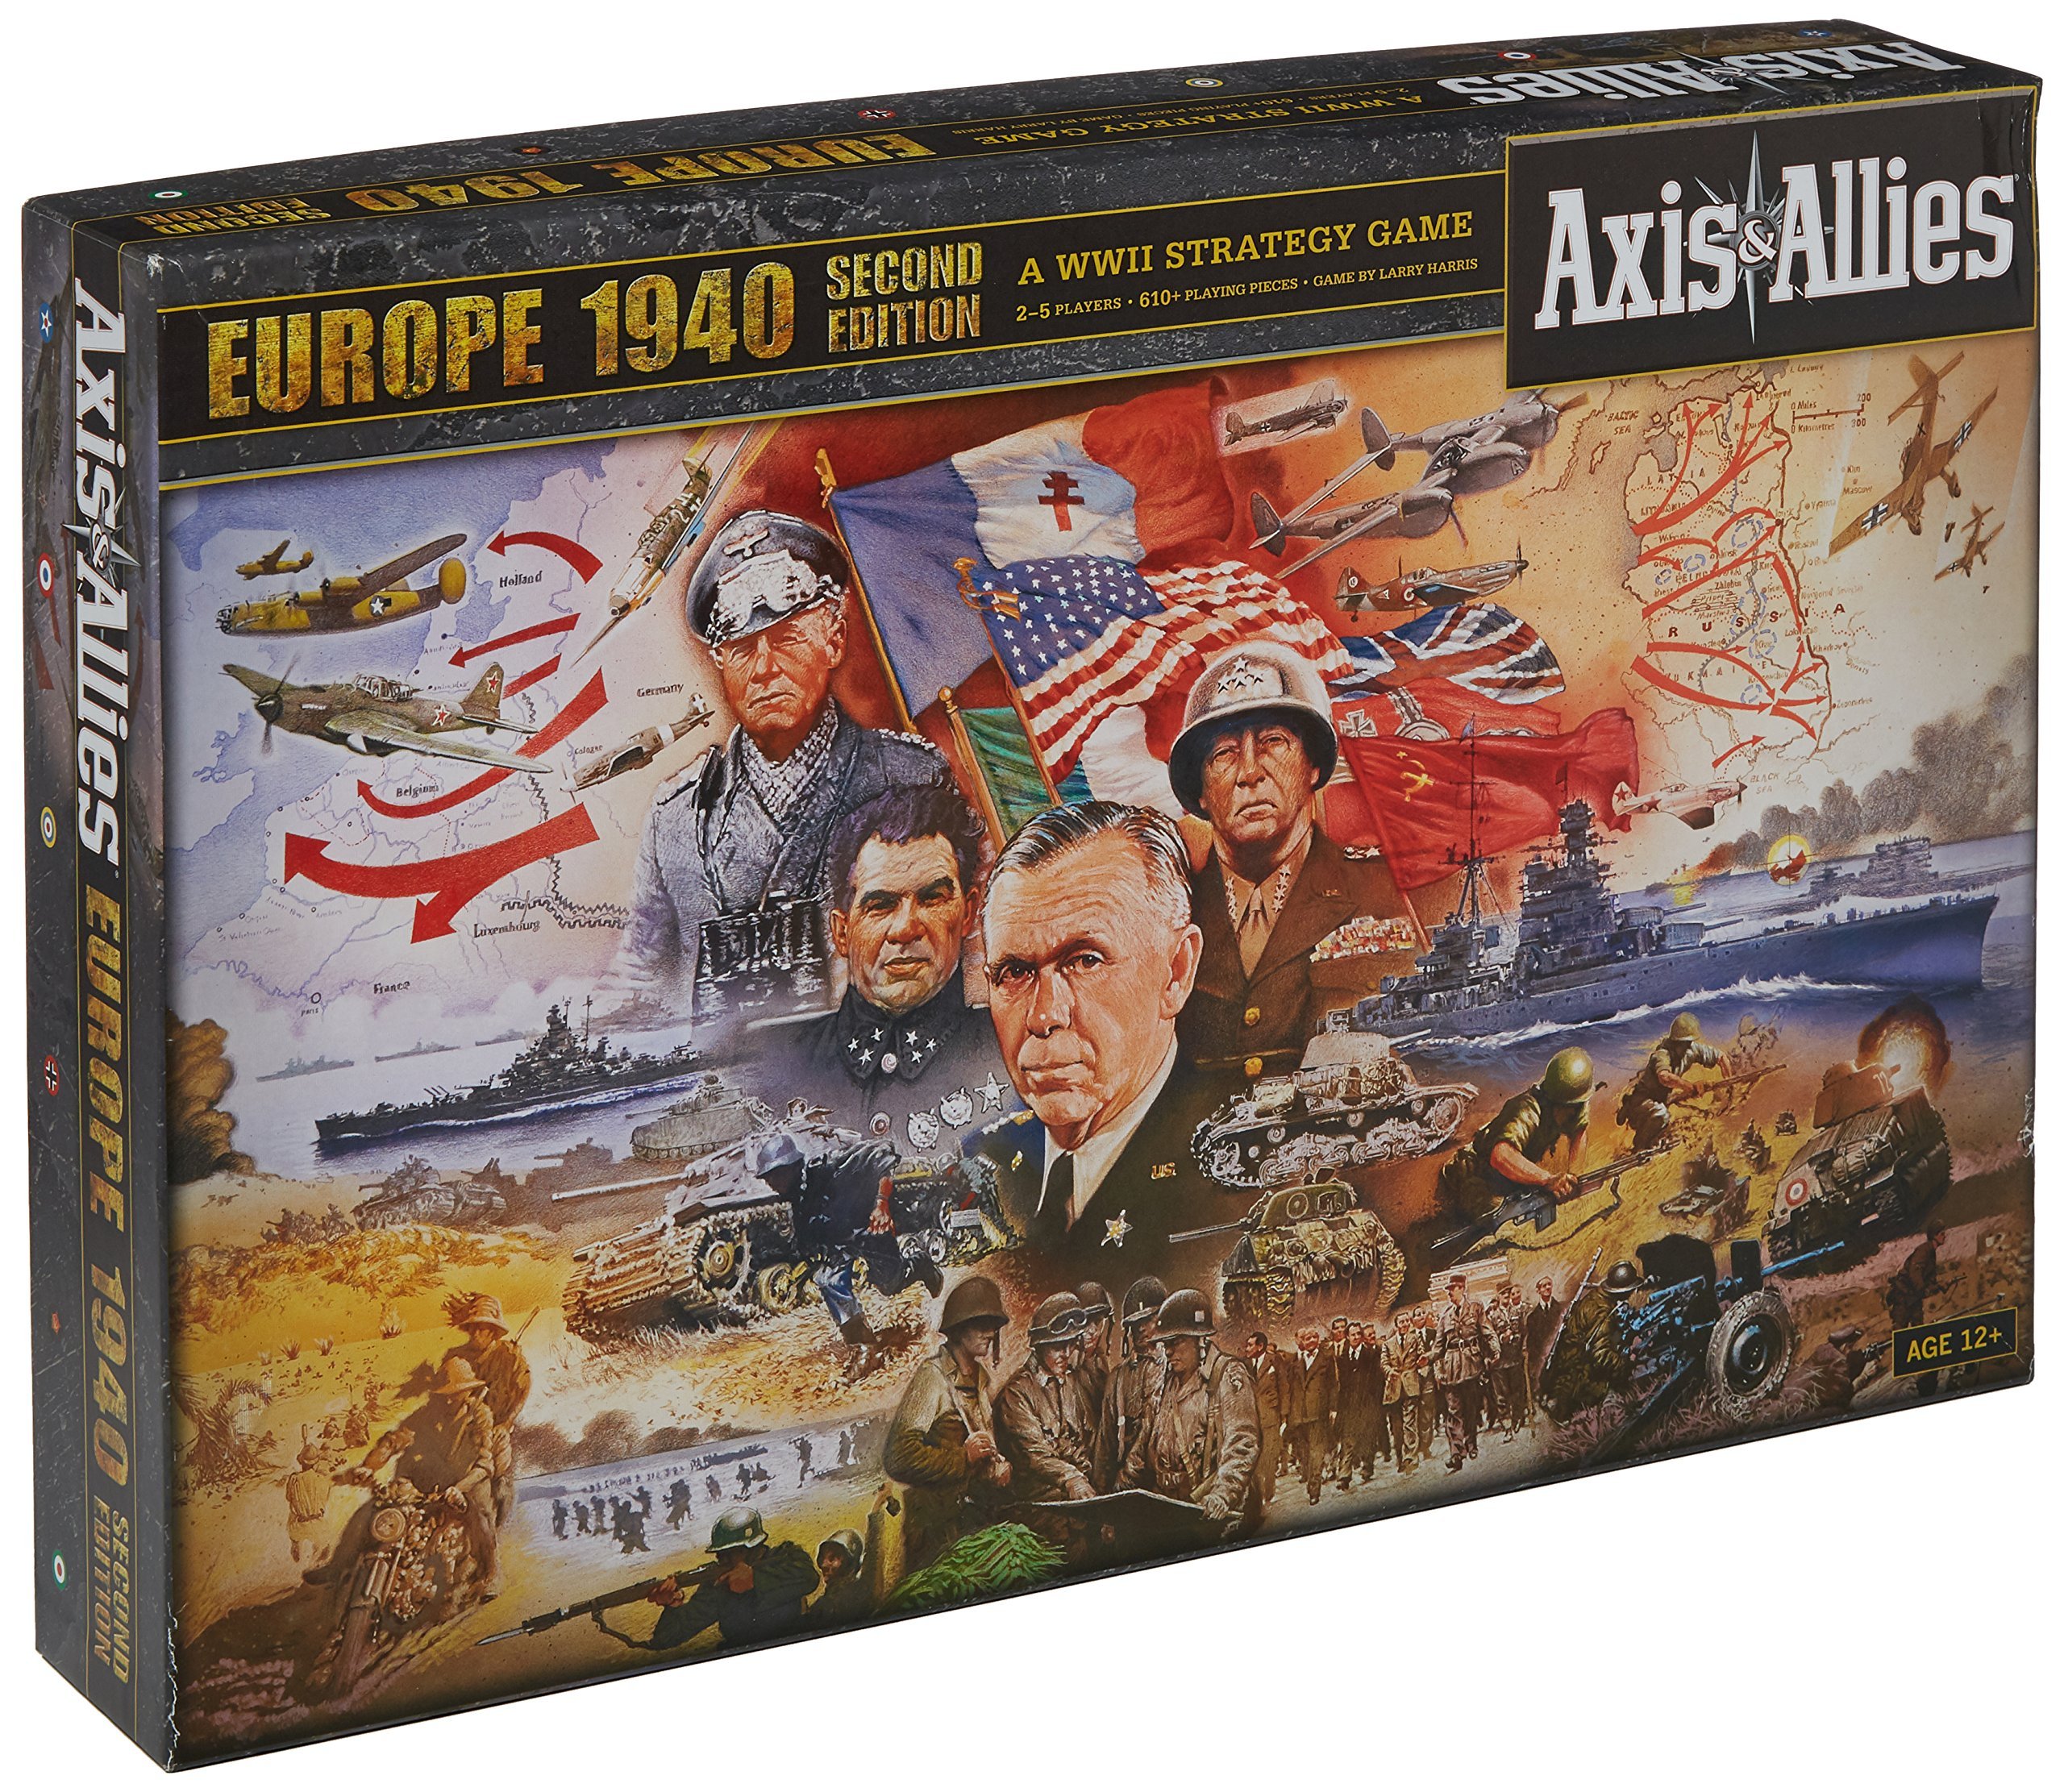 Book Cover Wizards of the Coast Axis and Allies Europe 1940 2nd Edition Board Game